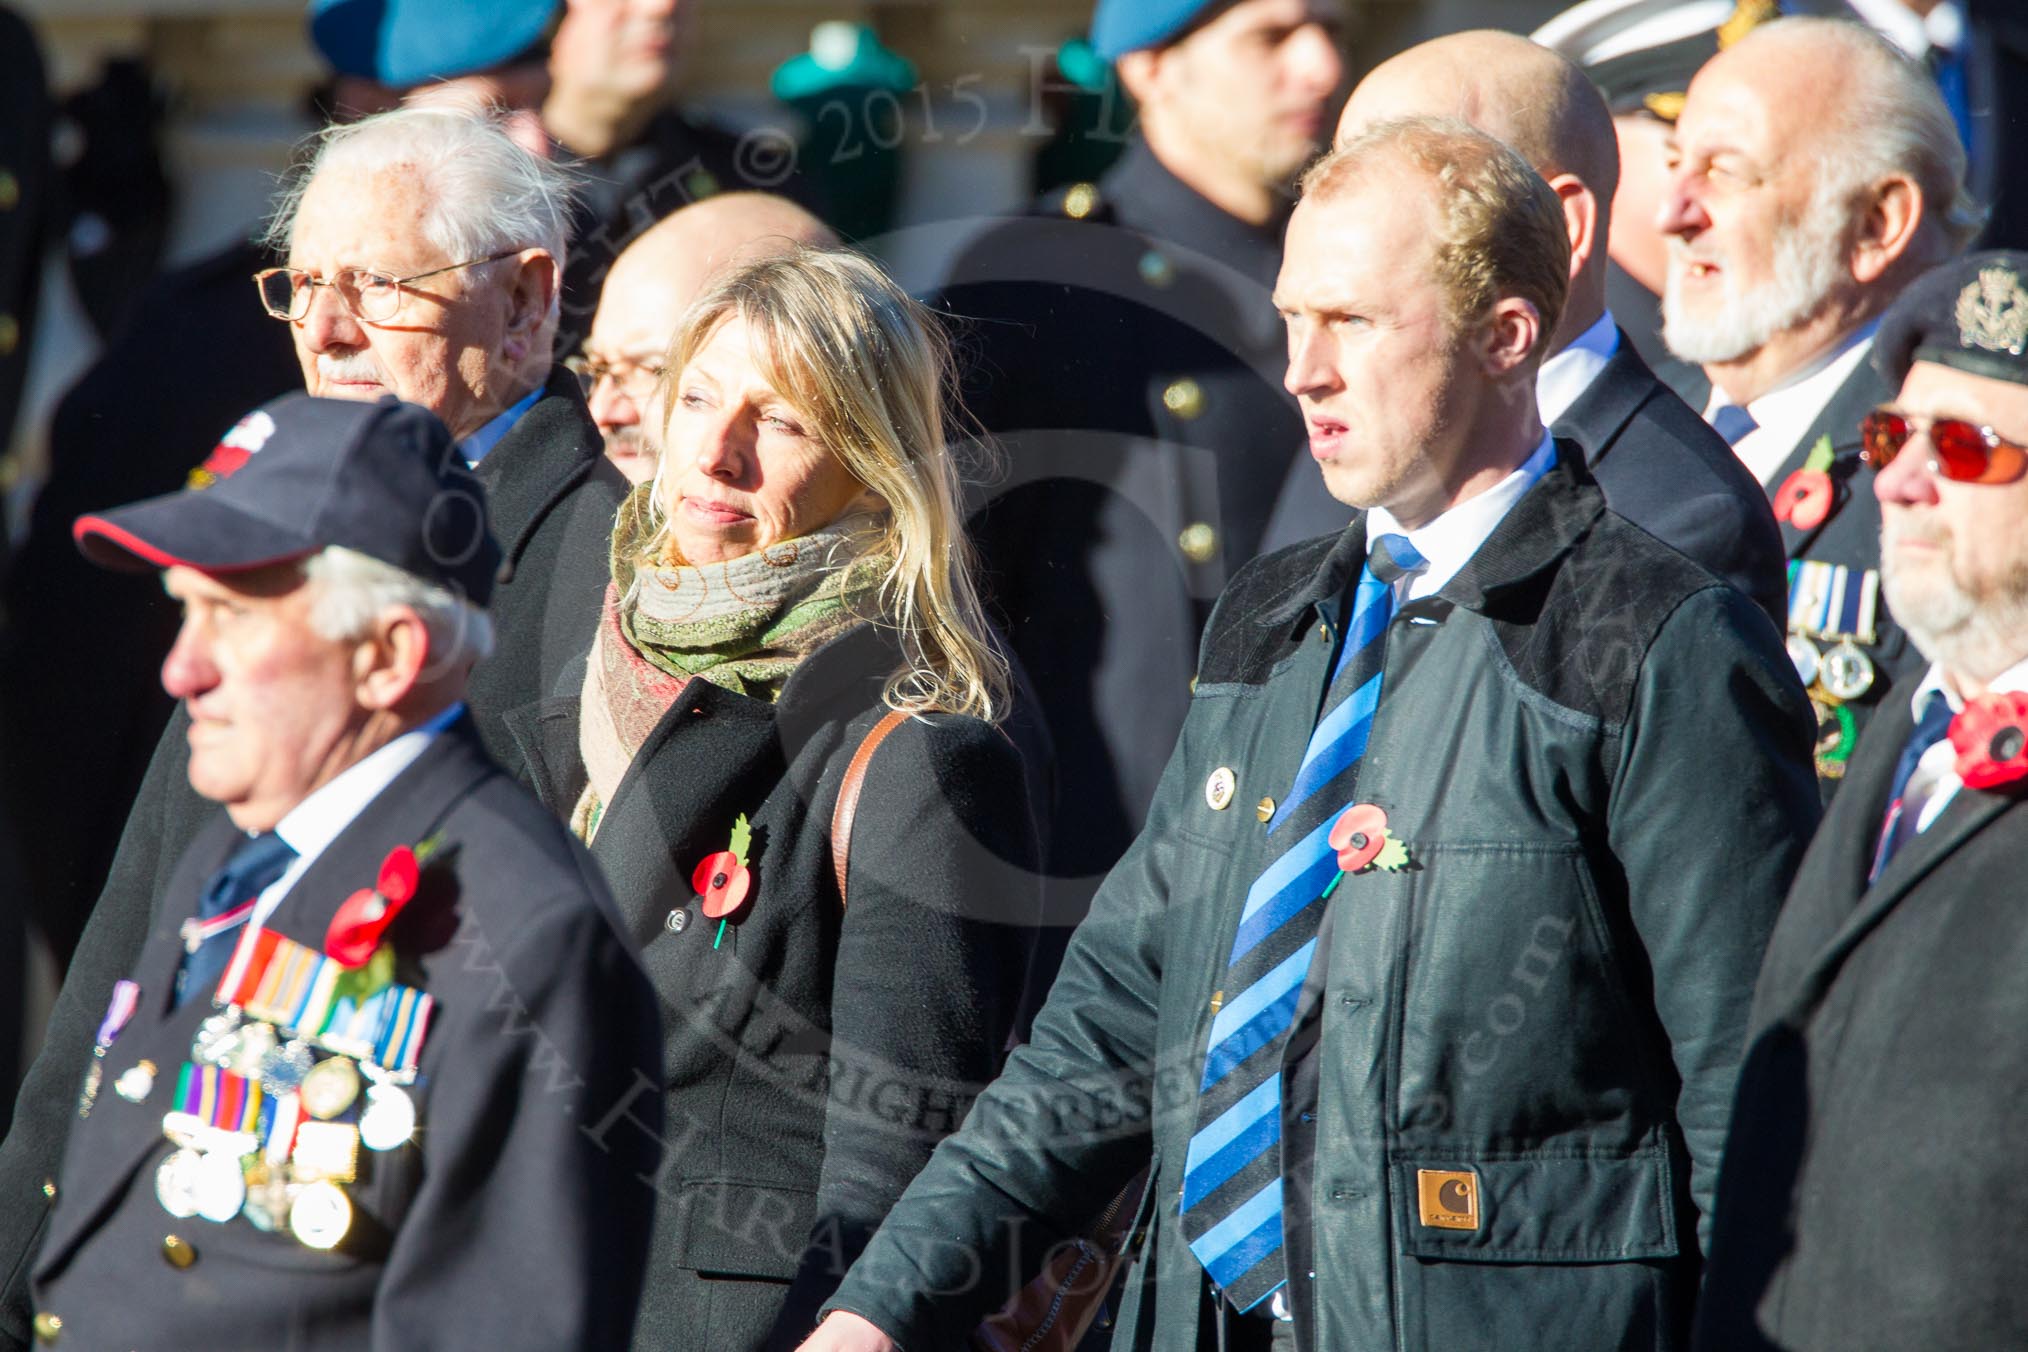 Remembrance Sunday Cenotaph March Past 2013: E2 - Royal Naval Association..
Press stand opposite the Foreign Office building, Whitehall, London SW1,
London,
Greater London,
United Kingdom,
on 10 November 2013 at 11:44, image #361